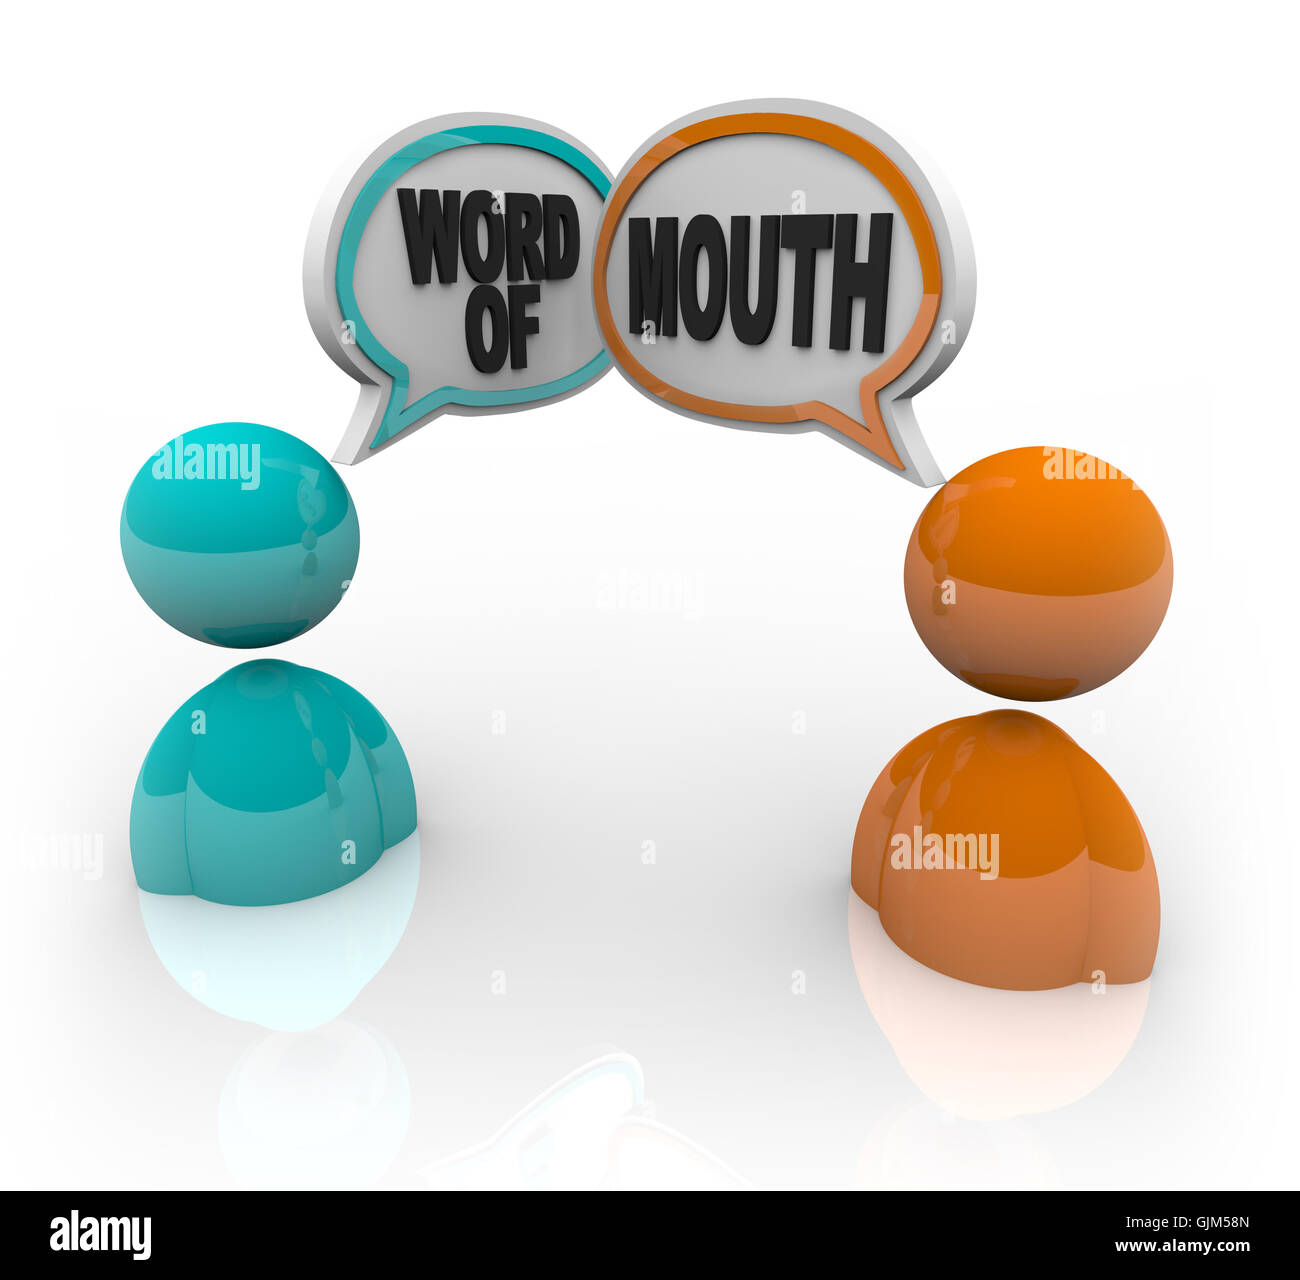 Word of Mouth - Two People Speaking Stock Photo